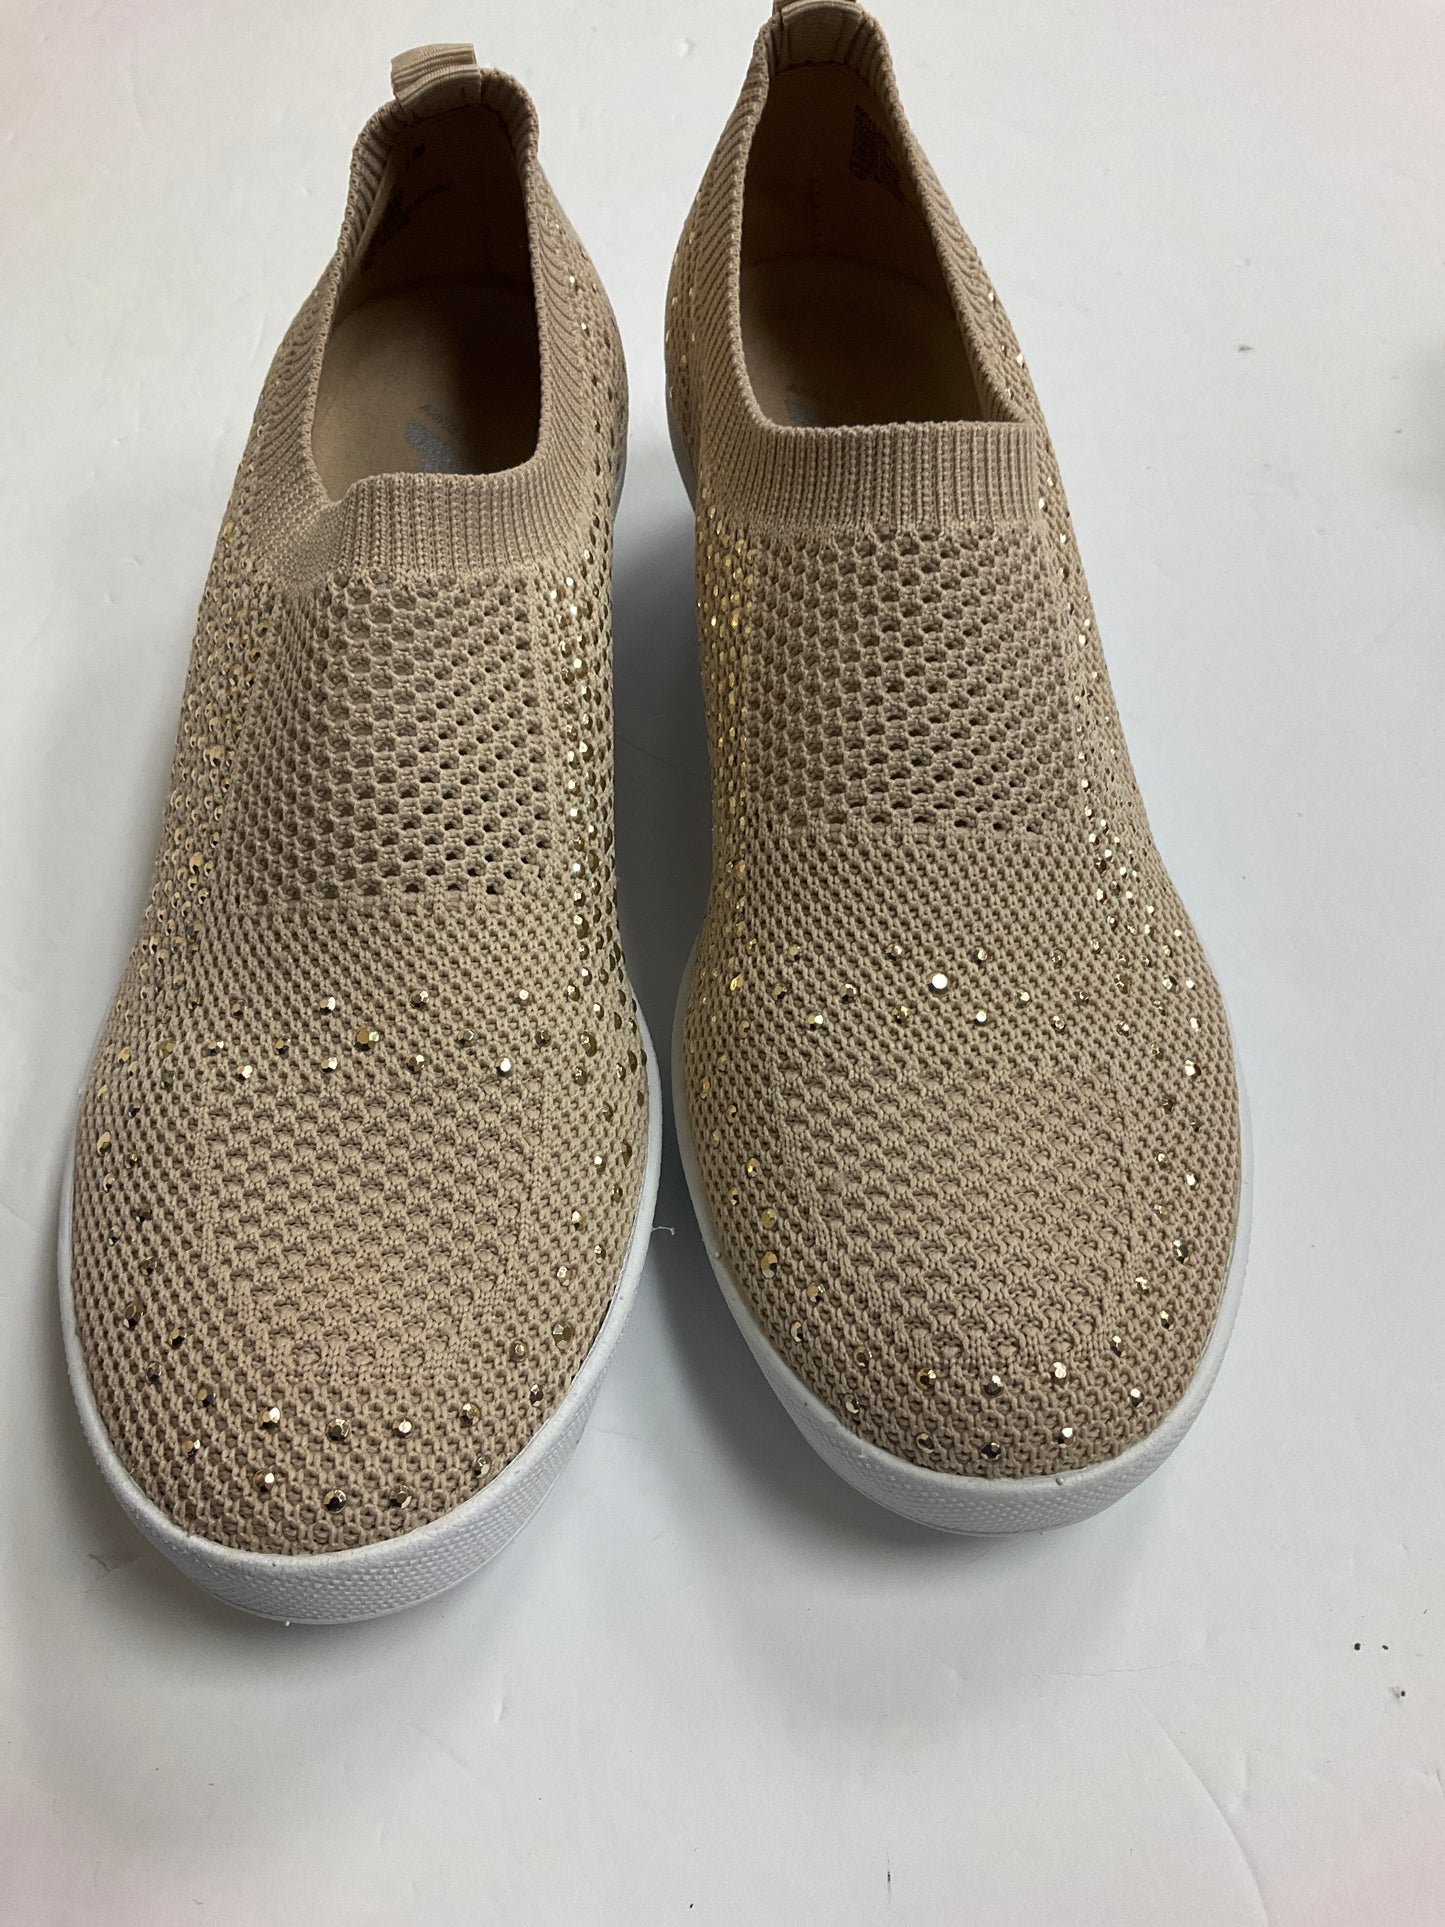 Shoes Flats Loafer Oxford By Anne Klein  Size: 8.5